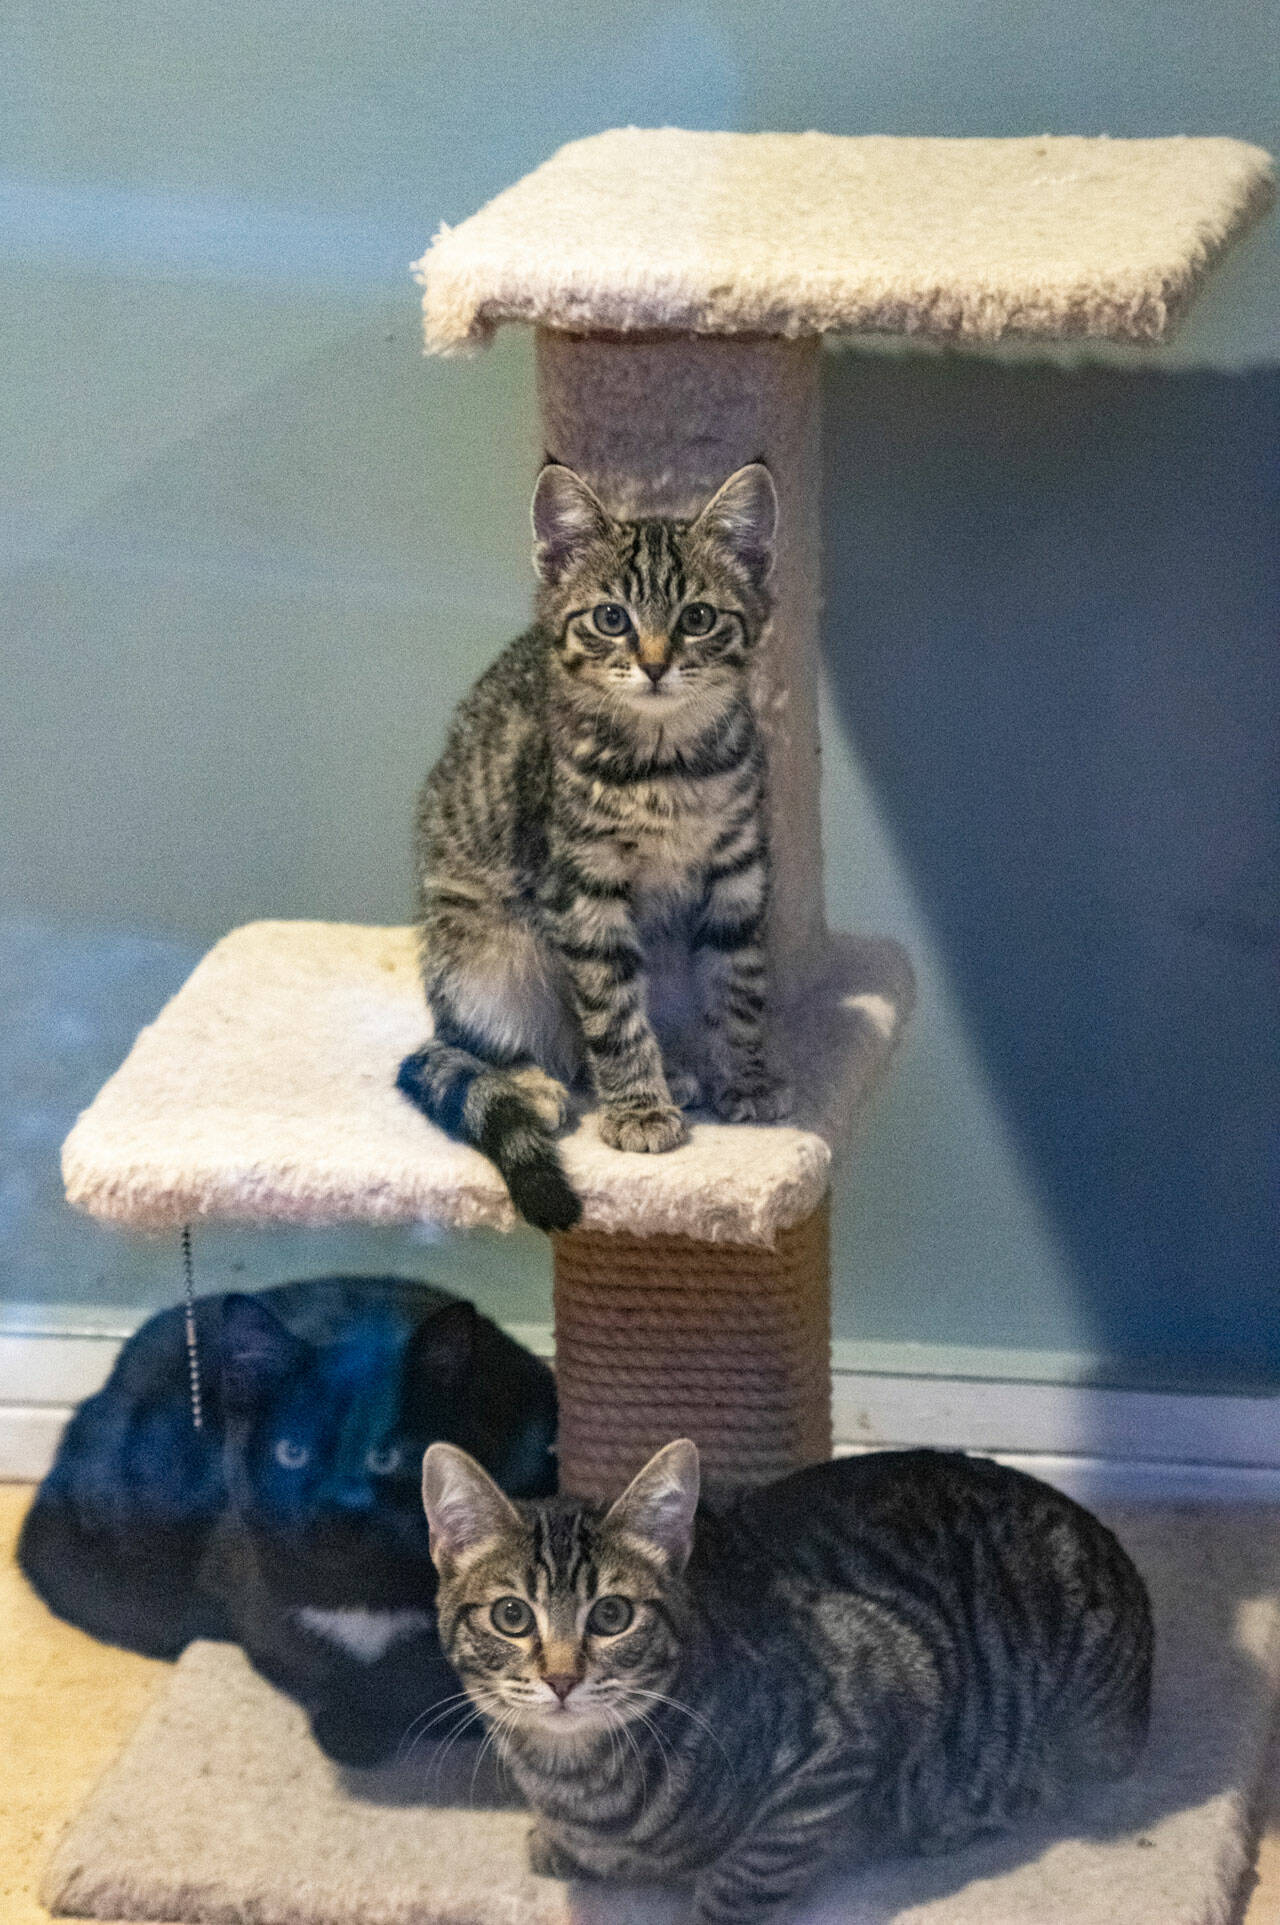 Cats at Olympic Peninsula Humane Society wait for their forever homes, or possibly, a foster home, as OPHS seeks more foster families in the community.